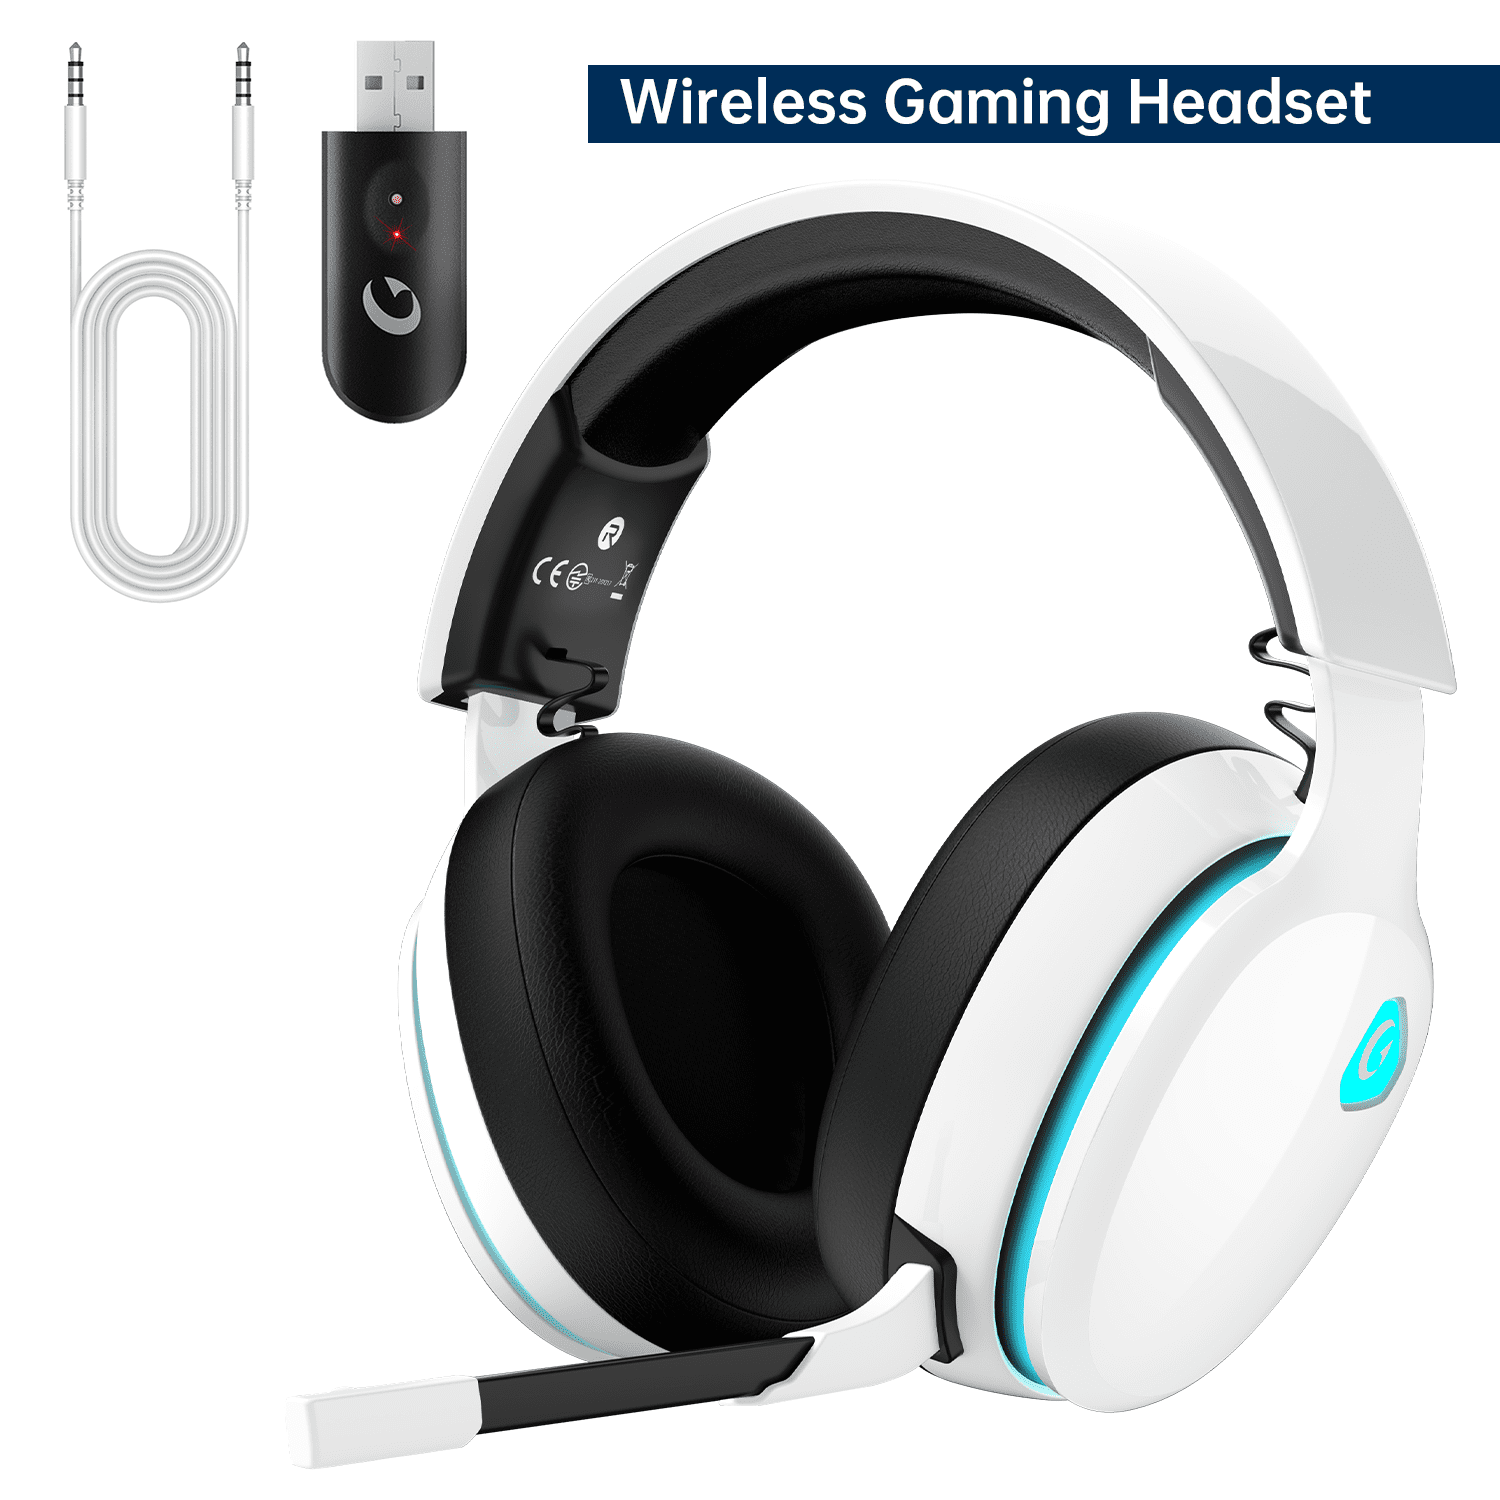 Pre-Owned CORSAIR - kit Bolt Axtion New) PC, Surround Headset HS70 Sound - PS4 Cleaning and 7.1 for PRO (Refurbished: Like Bundle Gaming With Cream PS5, Wireless